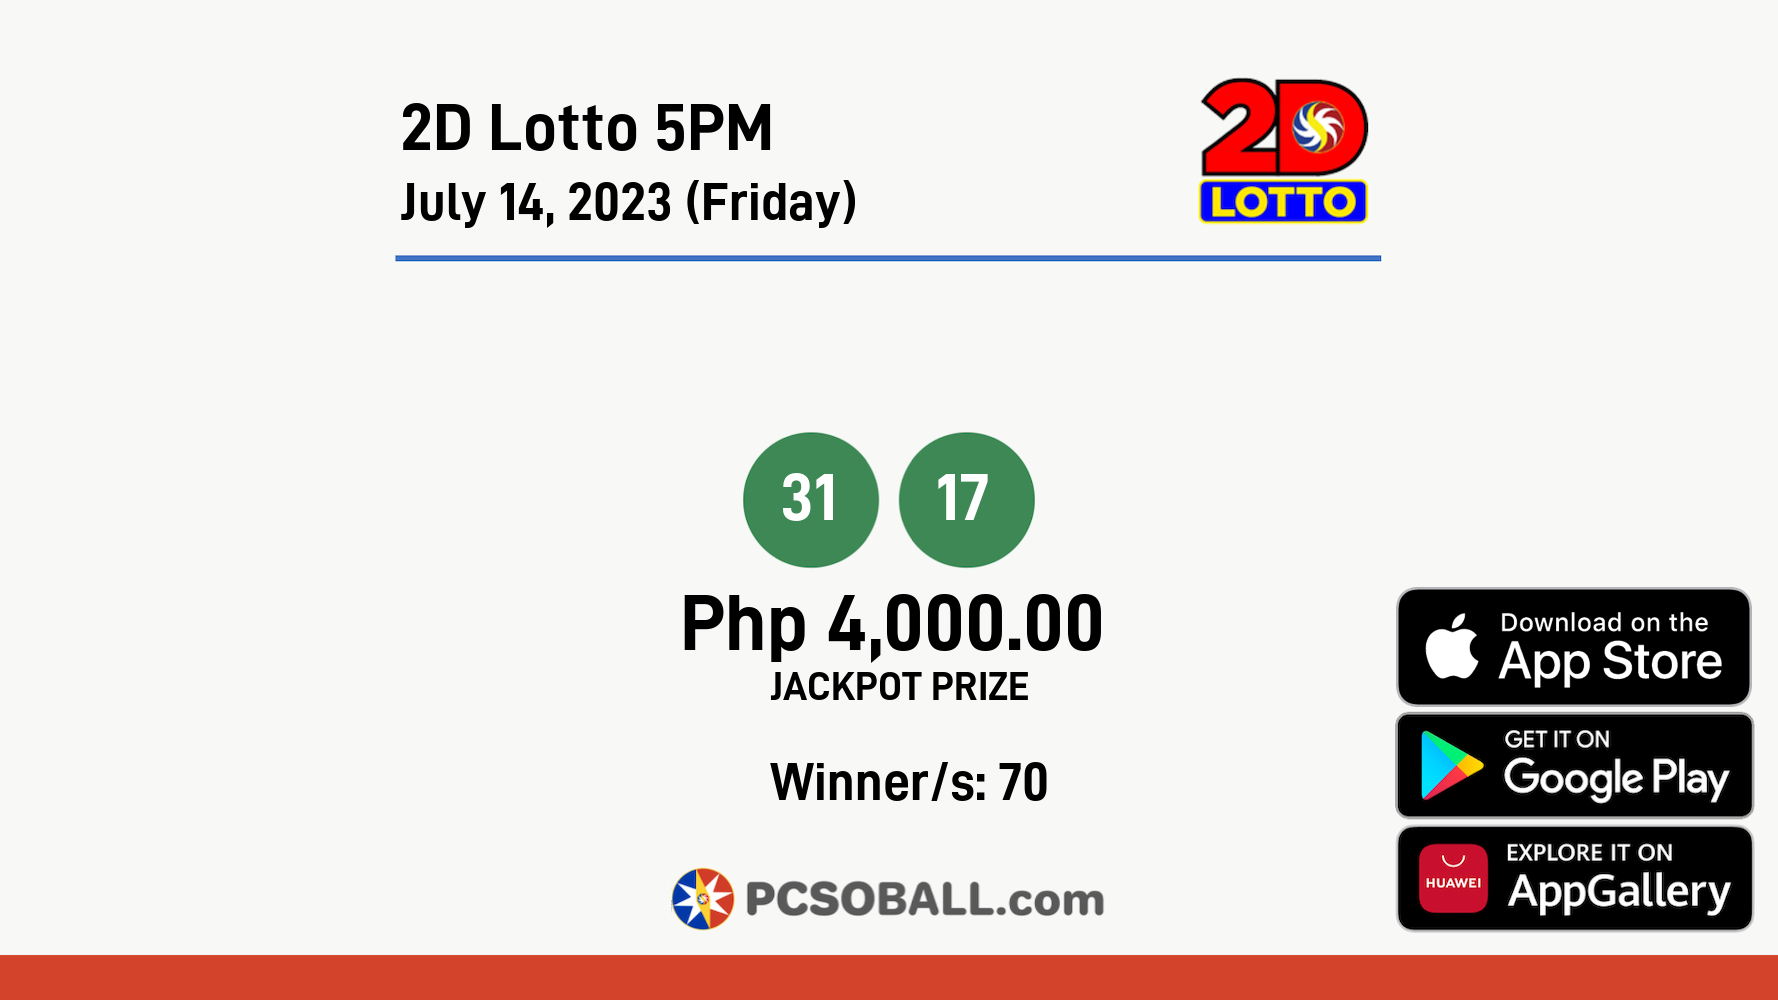 2D Lotto 5PM July 14, 2023 (Friday) Result